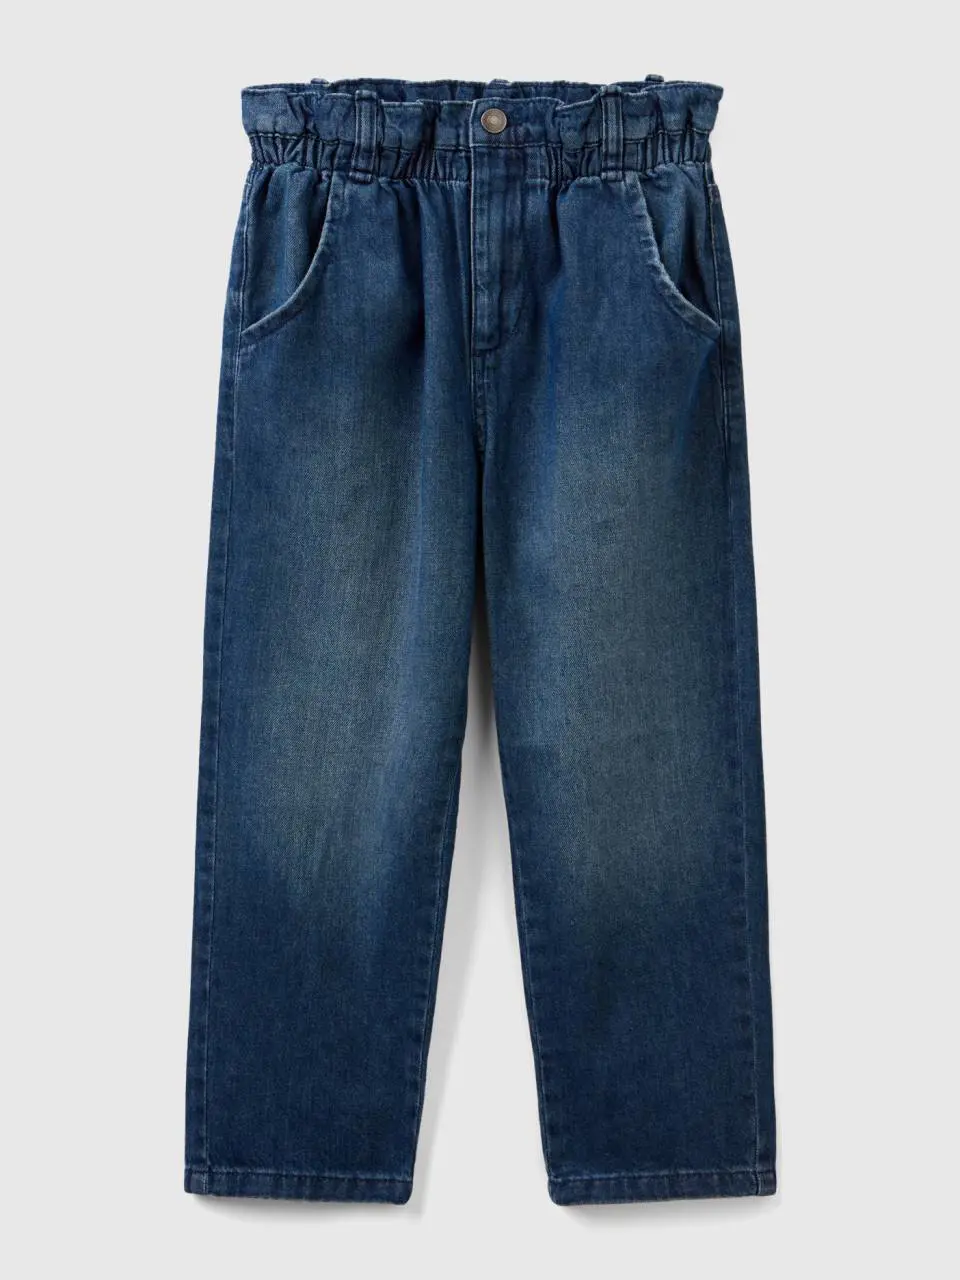 Benetton paperbag jeans in 100% cotton. 1